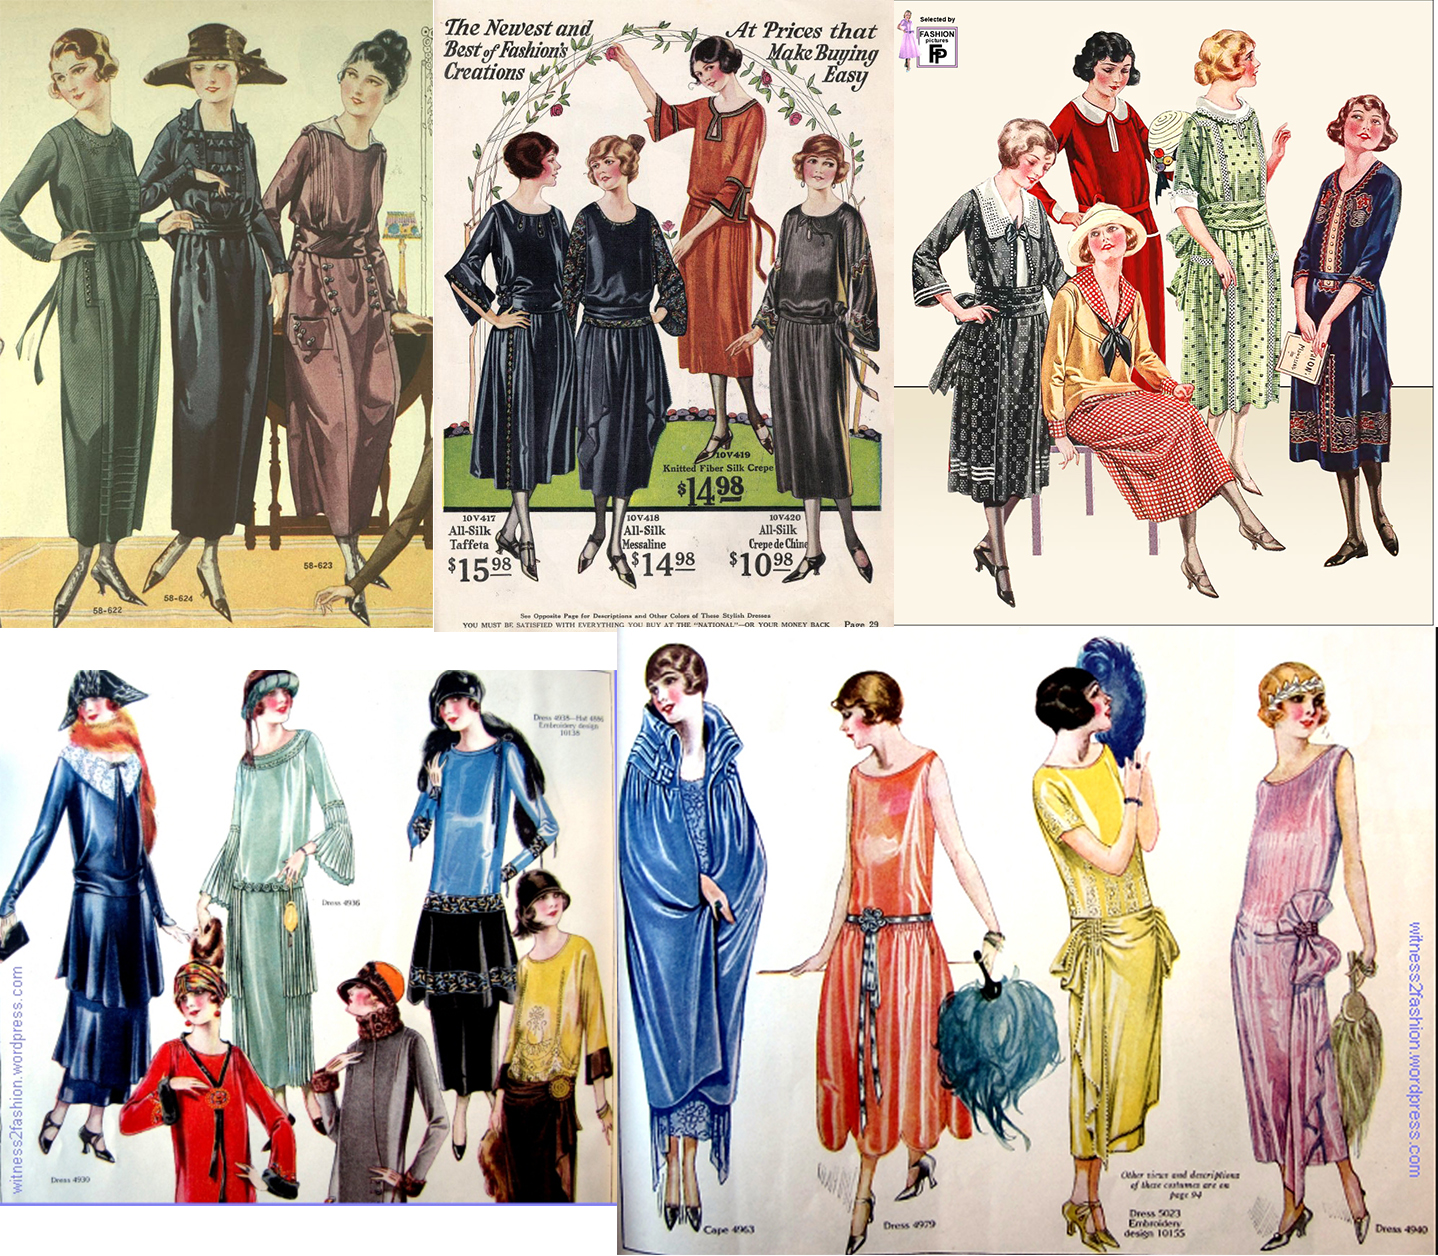 1920s fashion history: the women who changed our style forever